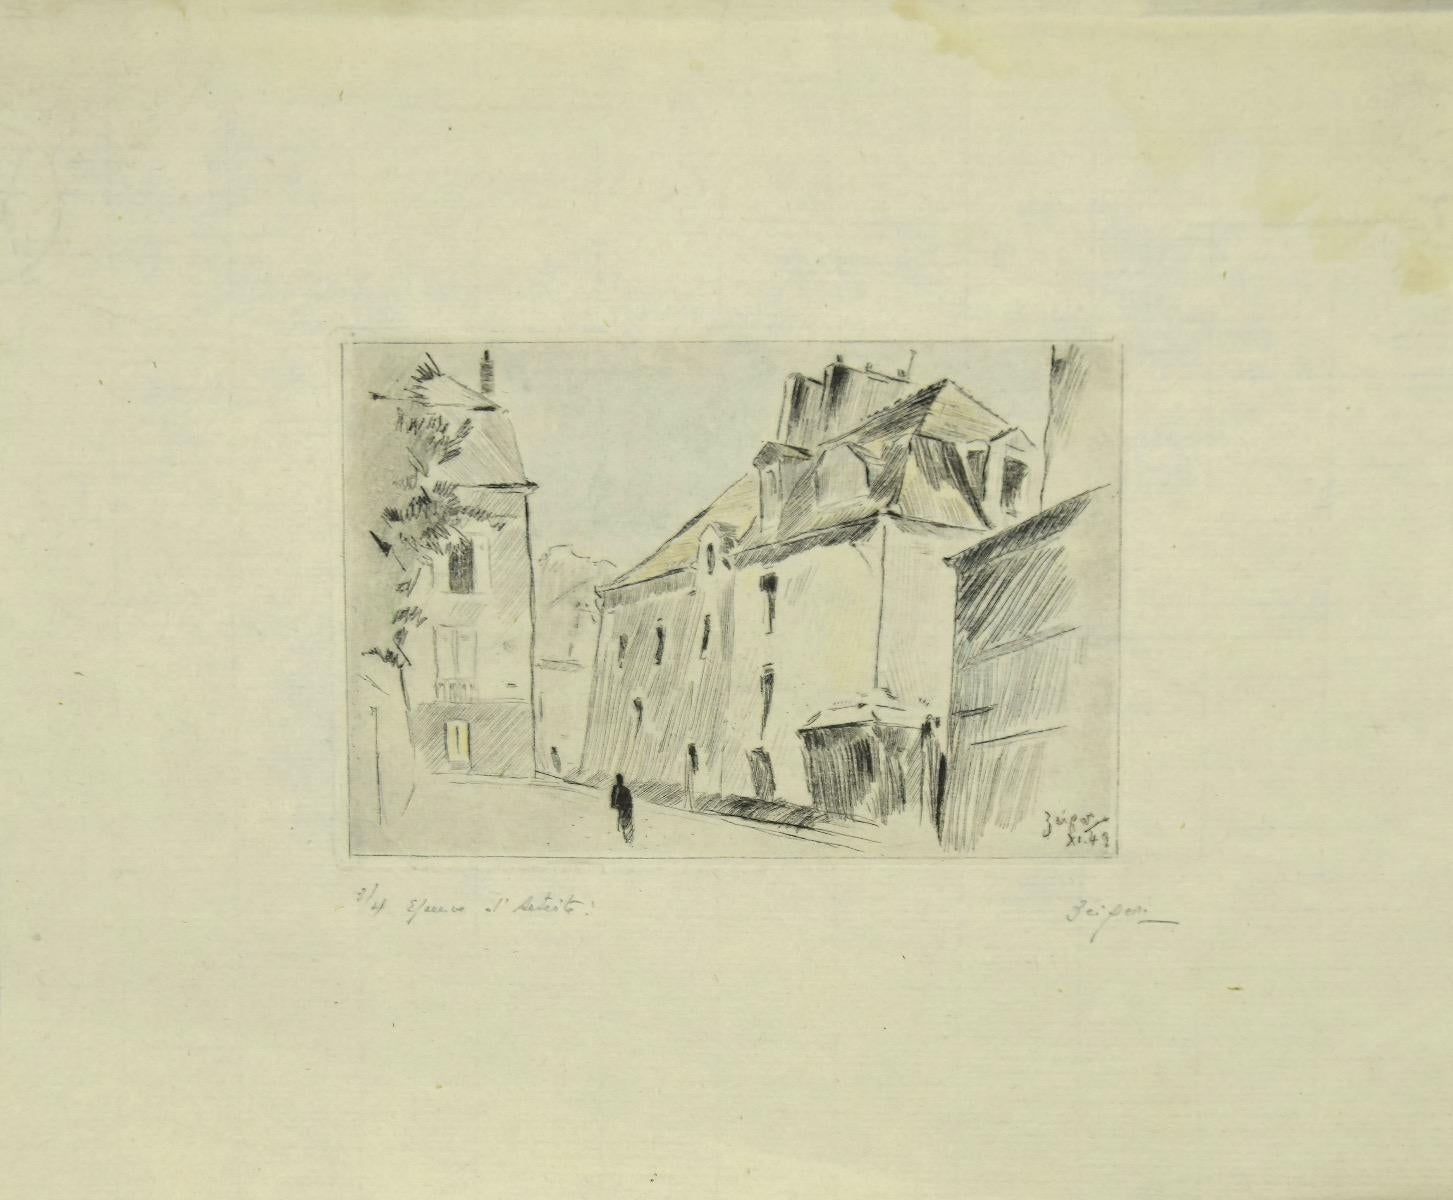 Country is an original etching on paper realized by Edmond Henri Zeiger de Baugy Valley (1895-1994).

Hand-signed and dated on the lower right in pencil. Numbered, edition of 3/4 prints. on the lower left in pencil.

The state of preservation is